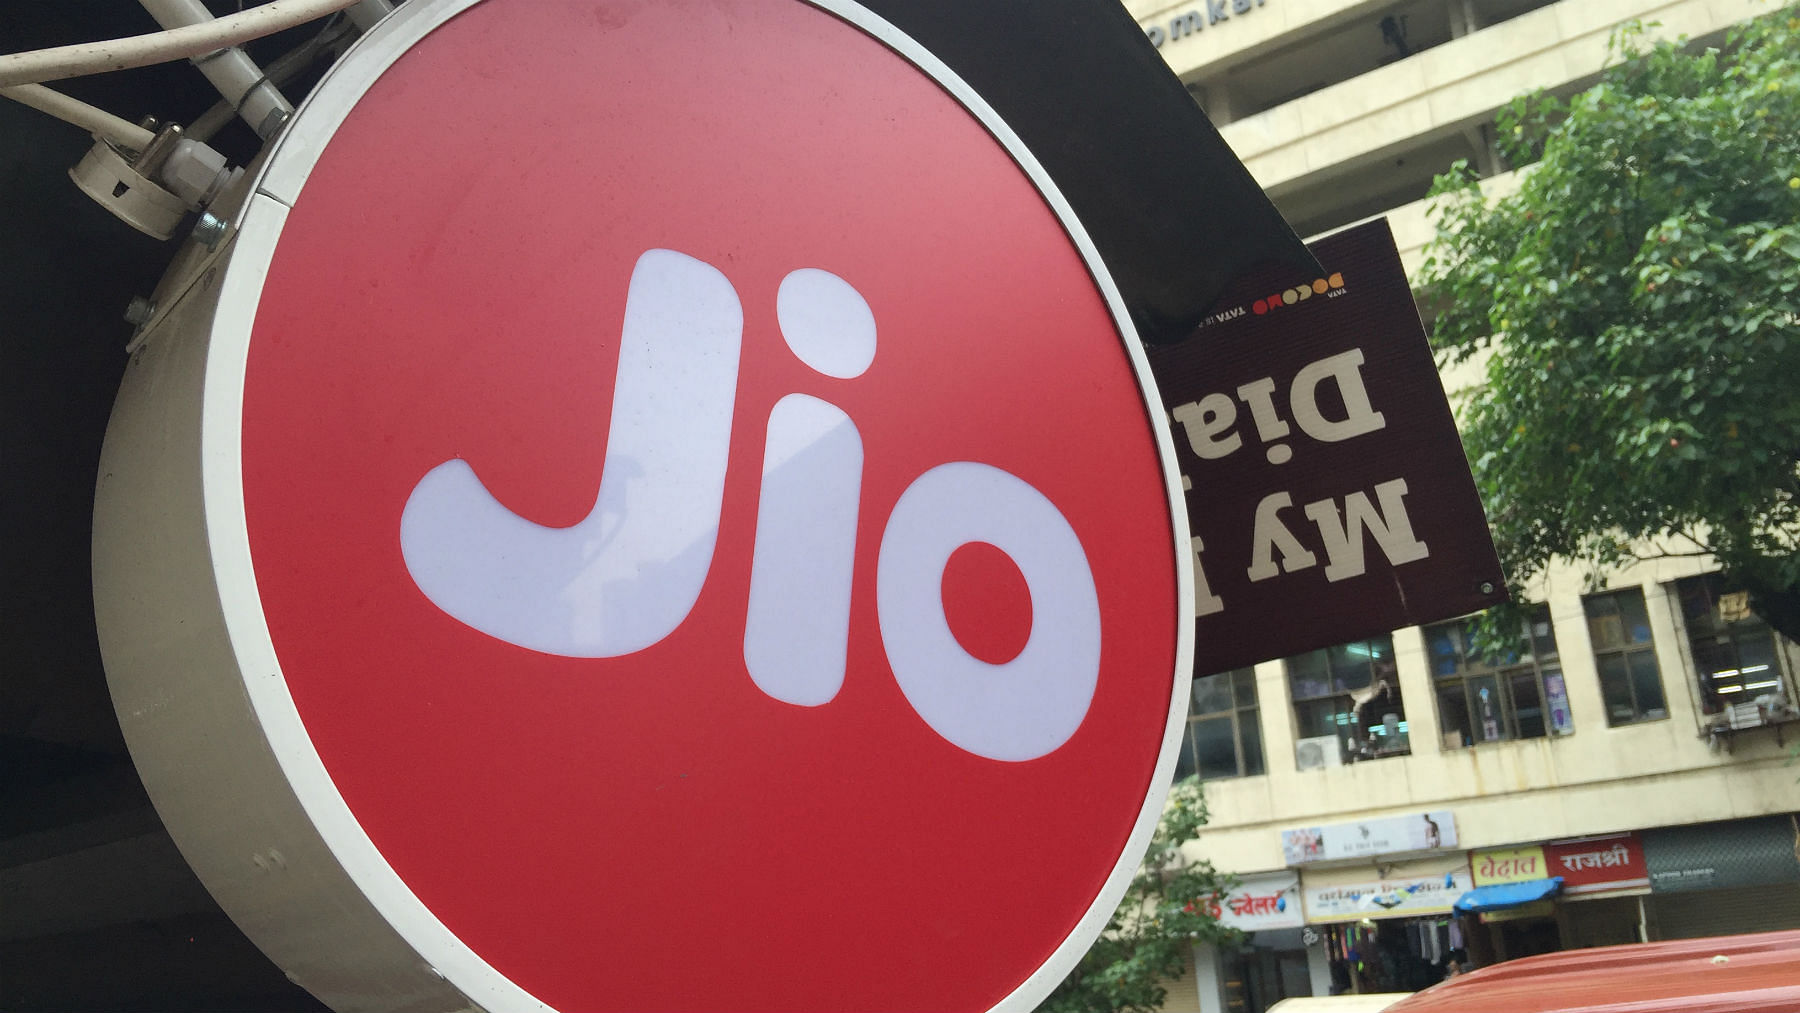 Reliance Jio wants fellow telcos to offer more connectivity points.